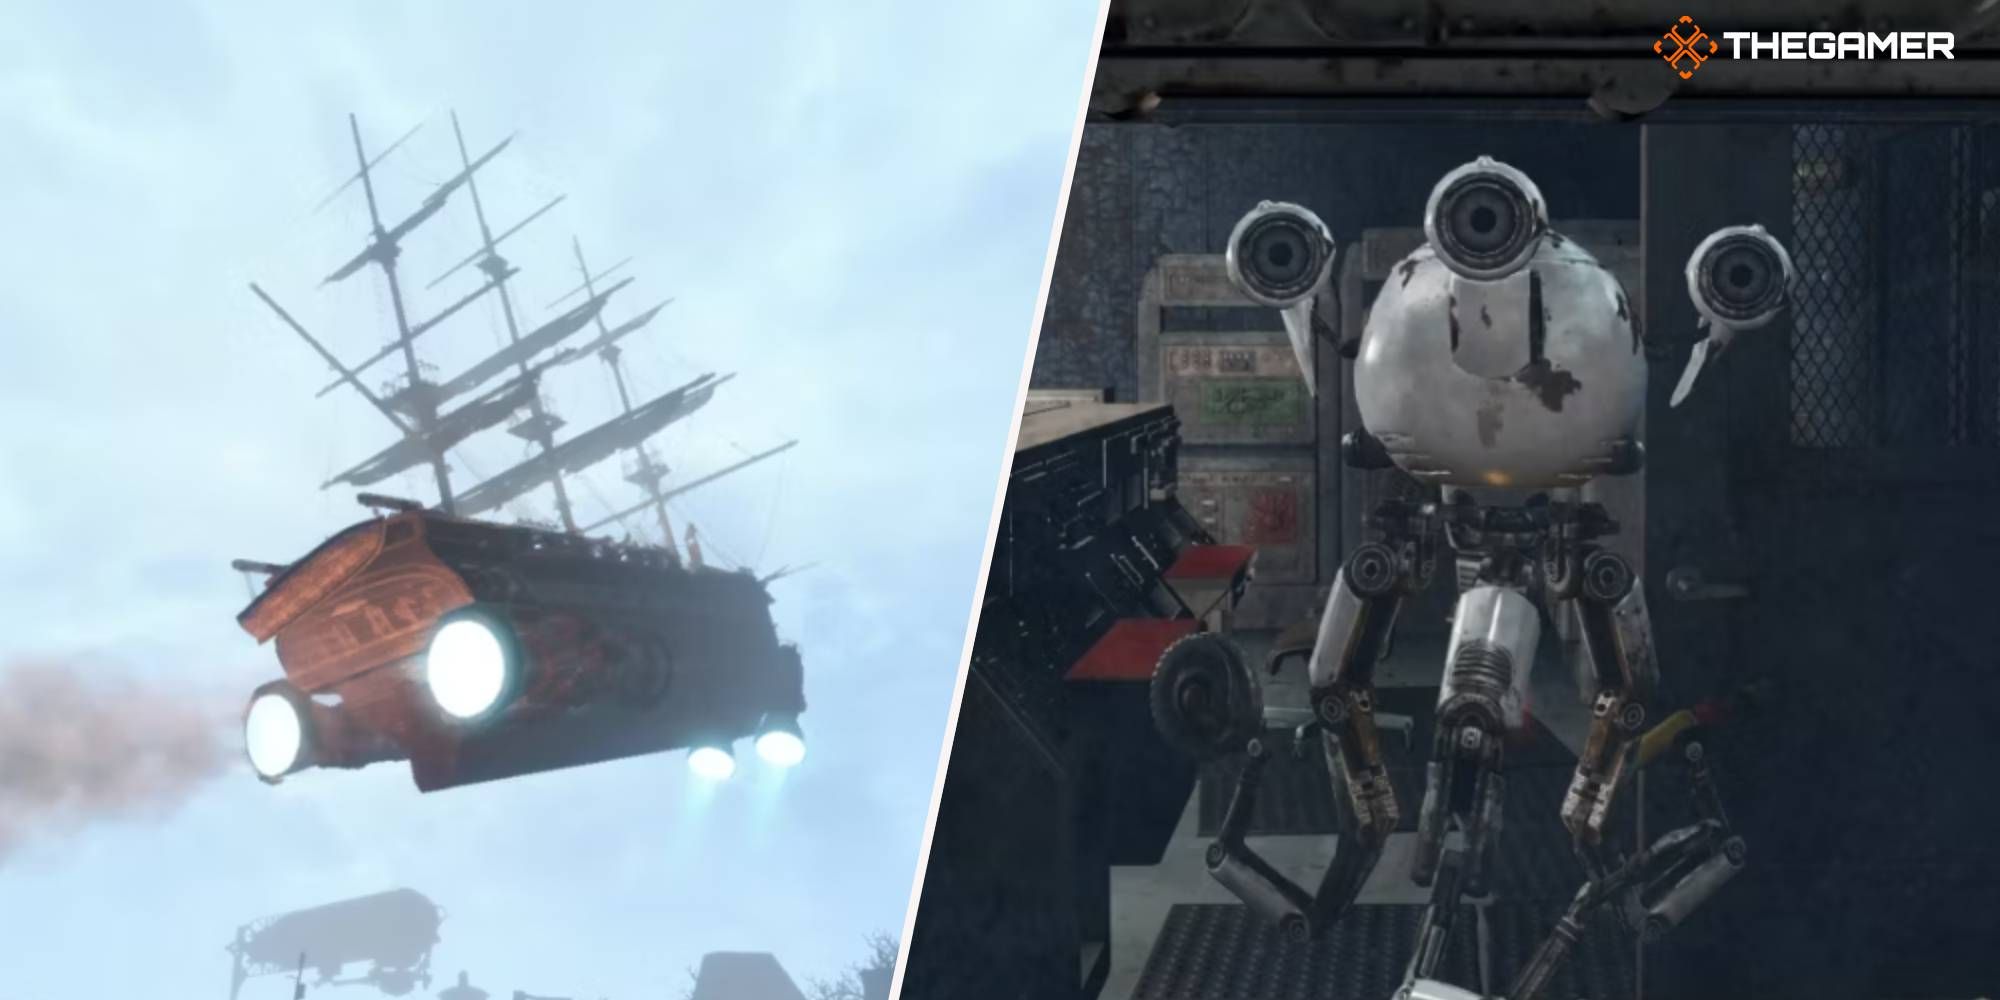 Fallout 4 USS Constitution and Curie the Robot